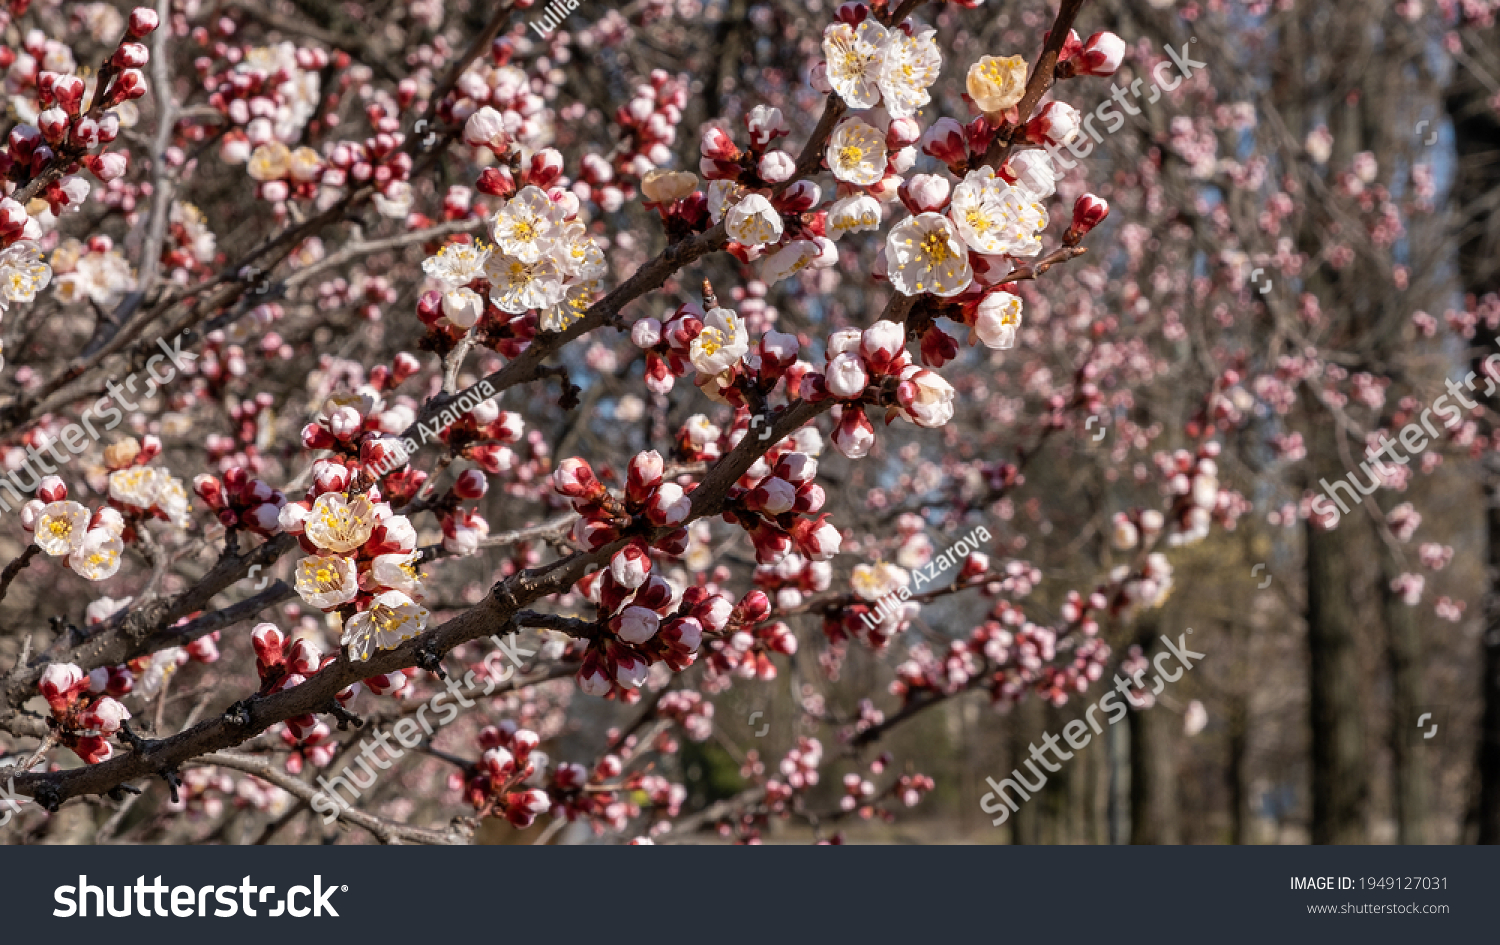 Nature in Springtime. Branch with beautiful white Spring Apricot Flowers on Tree. Nature scene with flowering apricot on blossom background. Botanical bloom concept. Blooming backdrop #1949127031